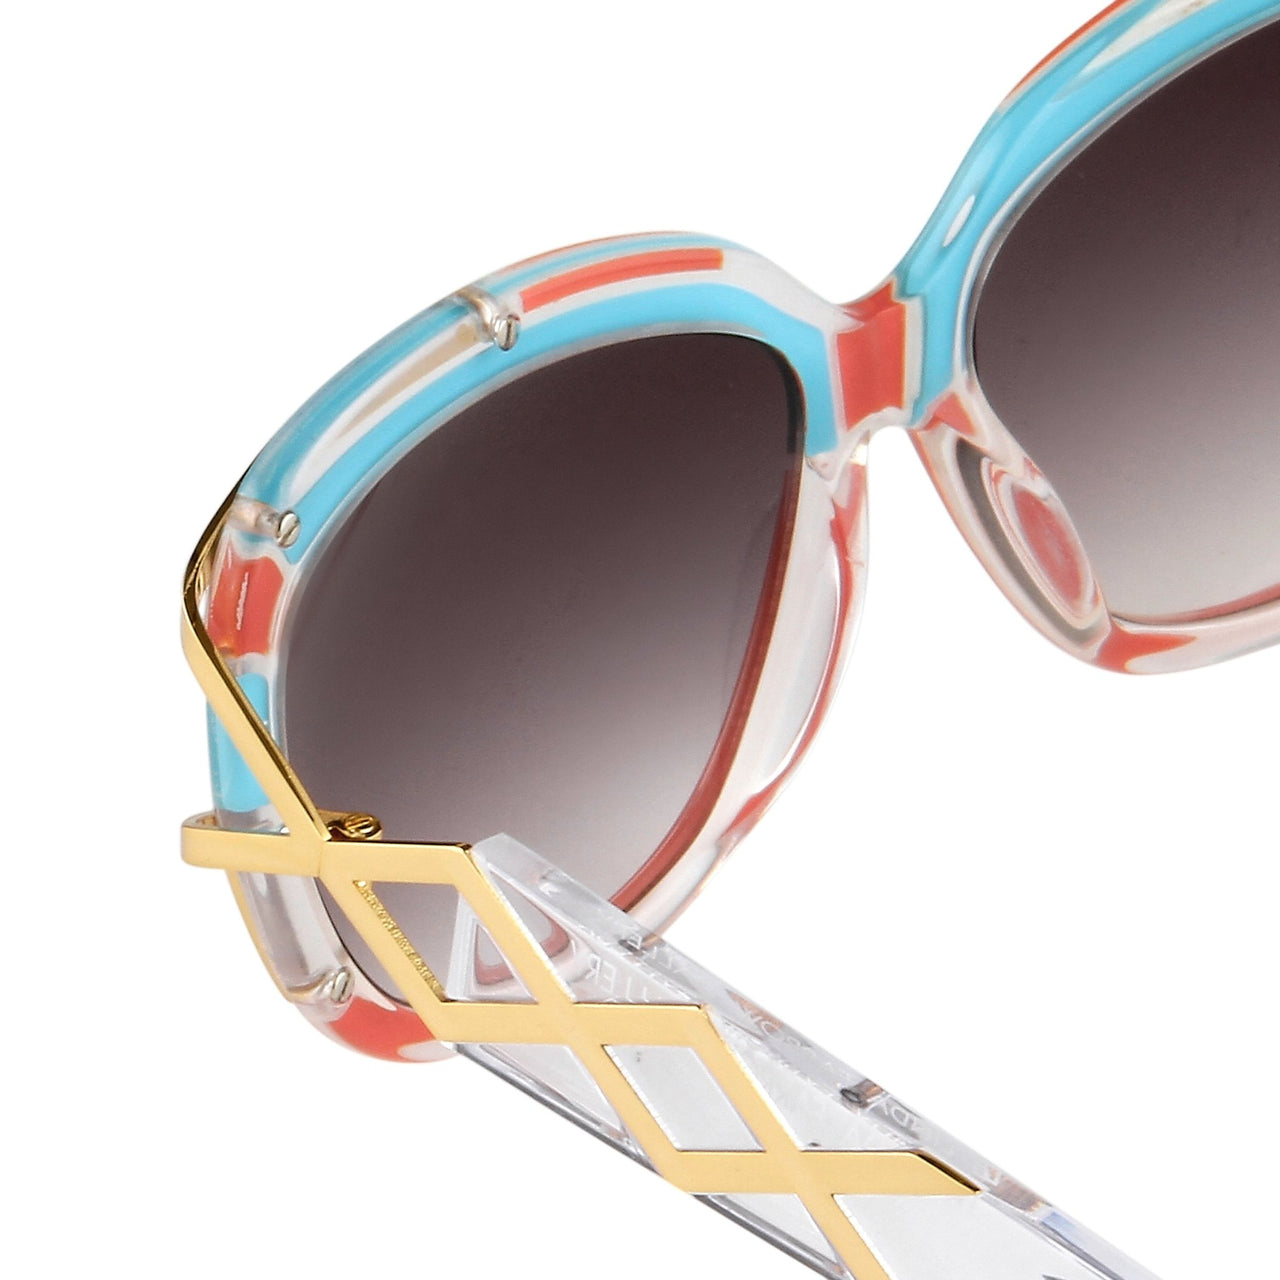 Prabal Gurung Sunglasses Square Clear Red Sky Blue With Grey Category 3 Graduated Lenses PG8C2SUN - Watches & Crystals